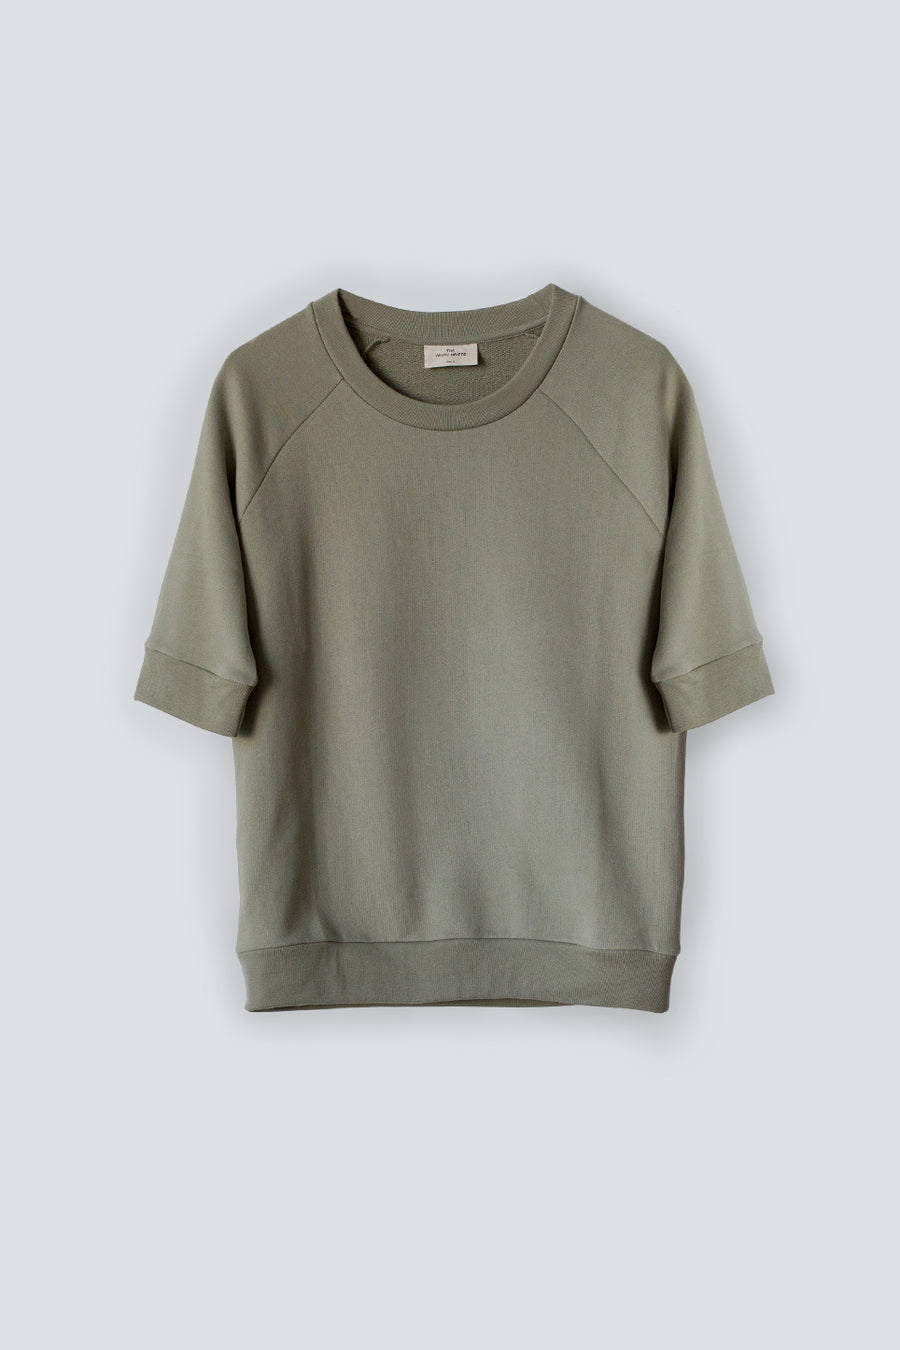 Relaxed fit women's khaki sweatshirt with 3/4 length sleeves and made from a soft 100% organic cotton terry